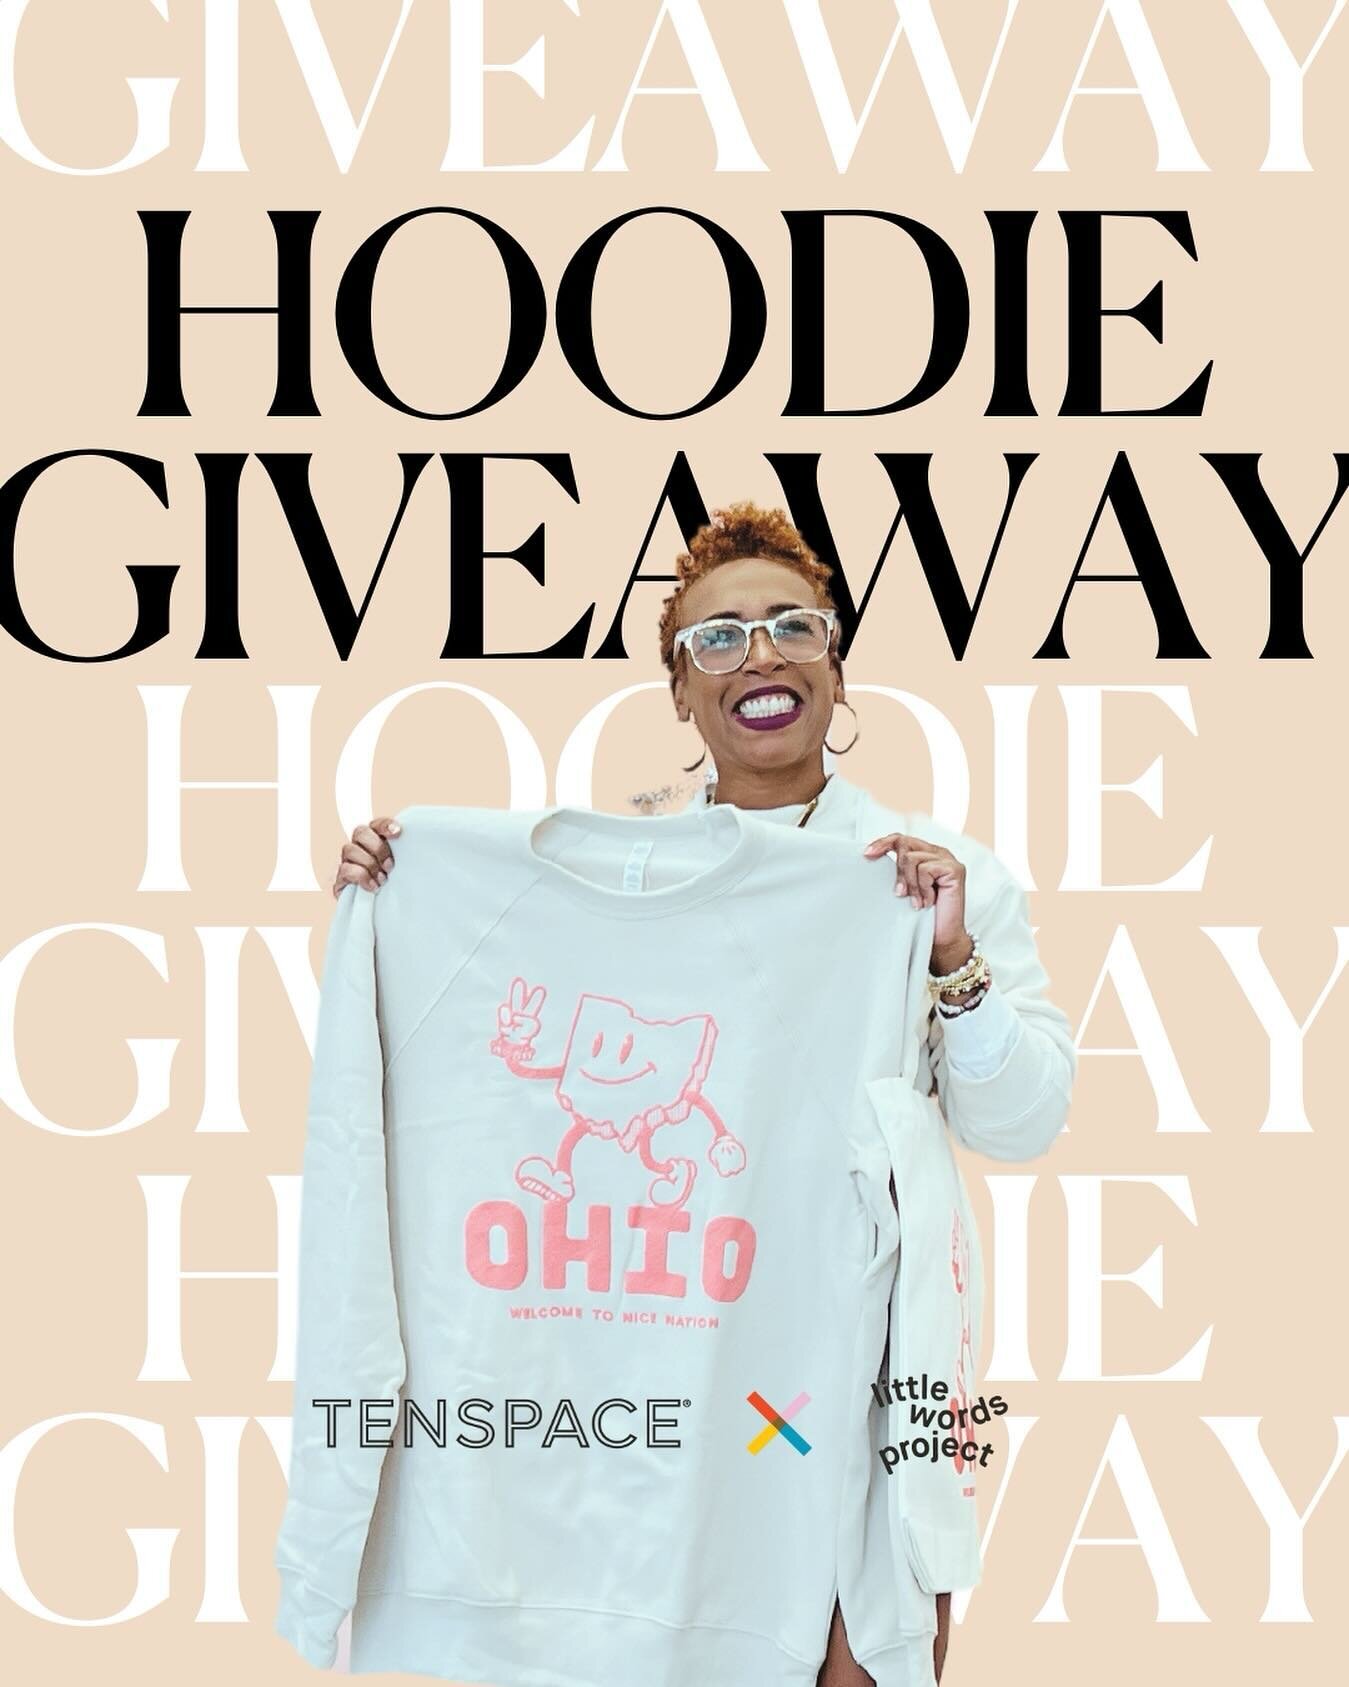 ✨GIVEAWAY✨ Before we say so long to Little Words Project experience experience in Cbus &mdash; Here&rsquo;s your chance to win a FREE sweatshirt for you and a friend 🫶

Here&rsquo;s how to enter:&nbsp;
1. Share this post to your stories&nbsp;
2. Tag